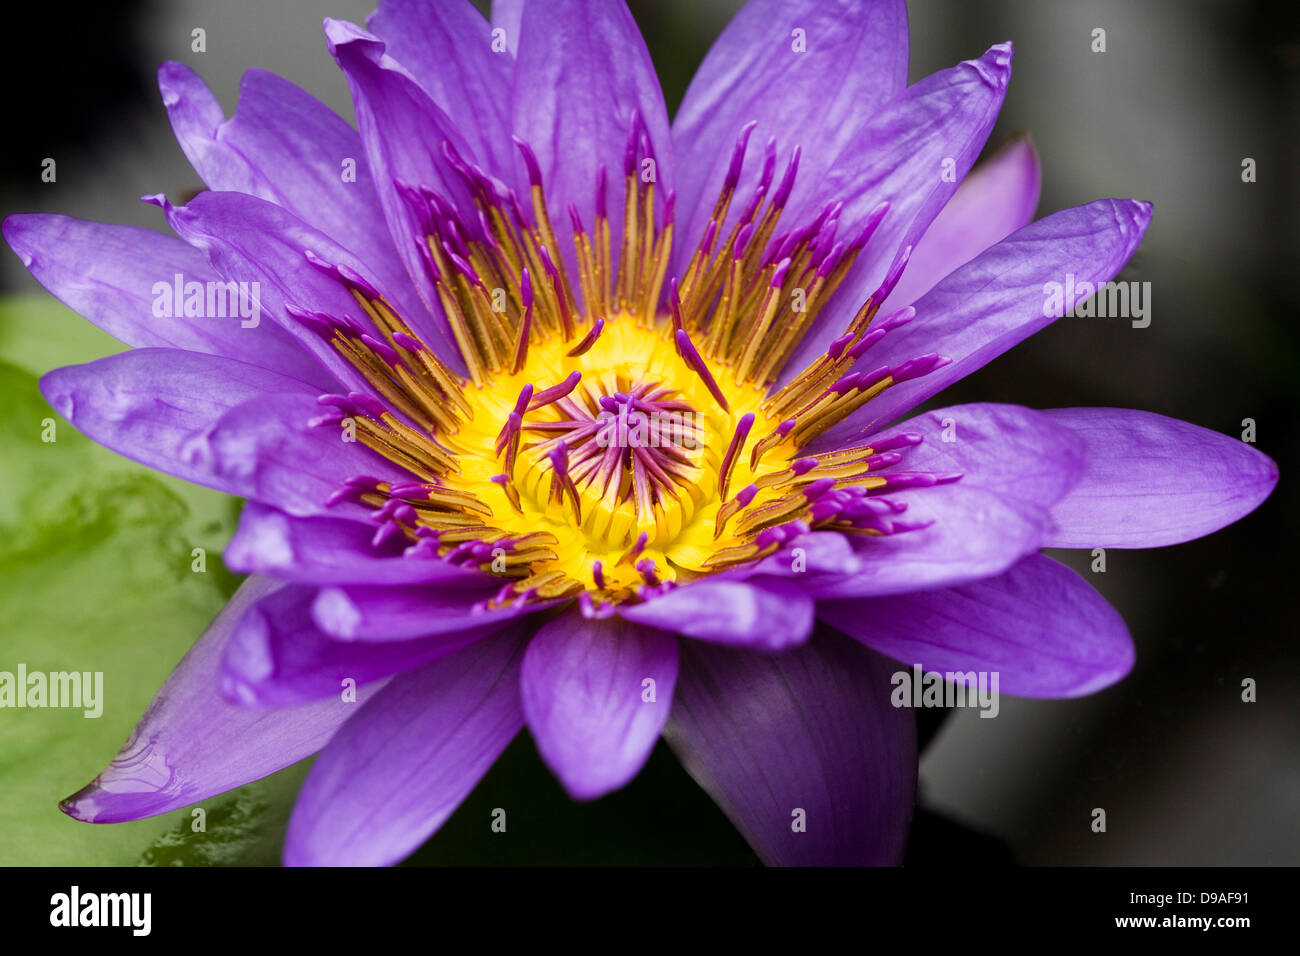 Nymphaeae 'Director George T. Moore'. Waterlily flower. Stock Photo